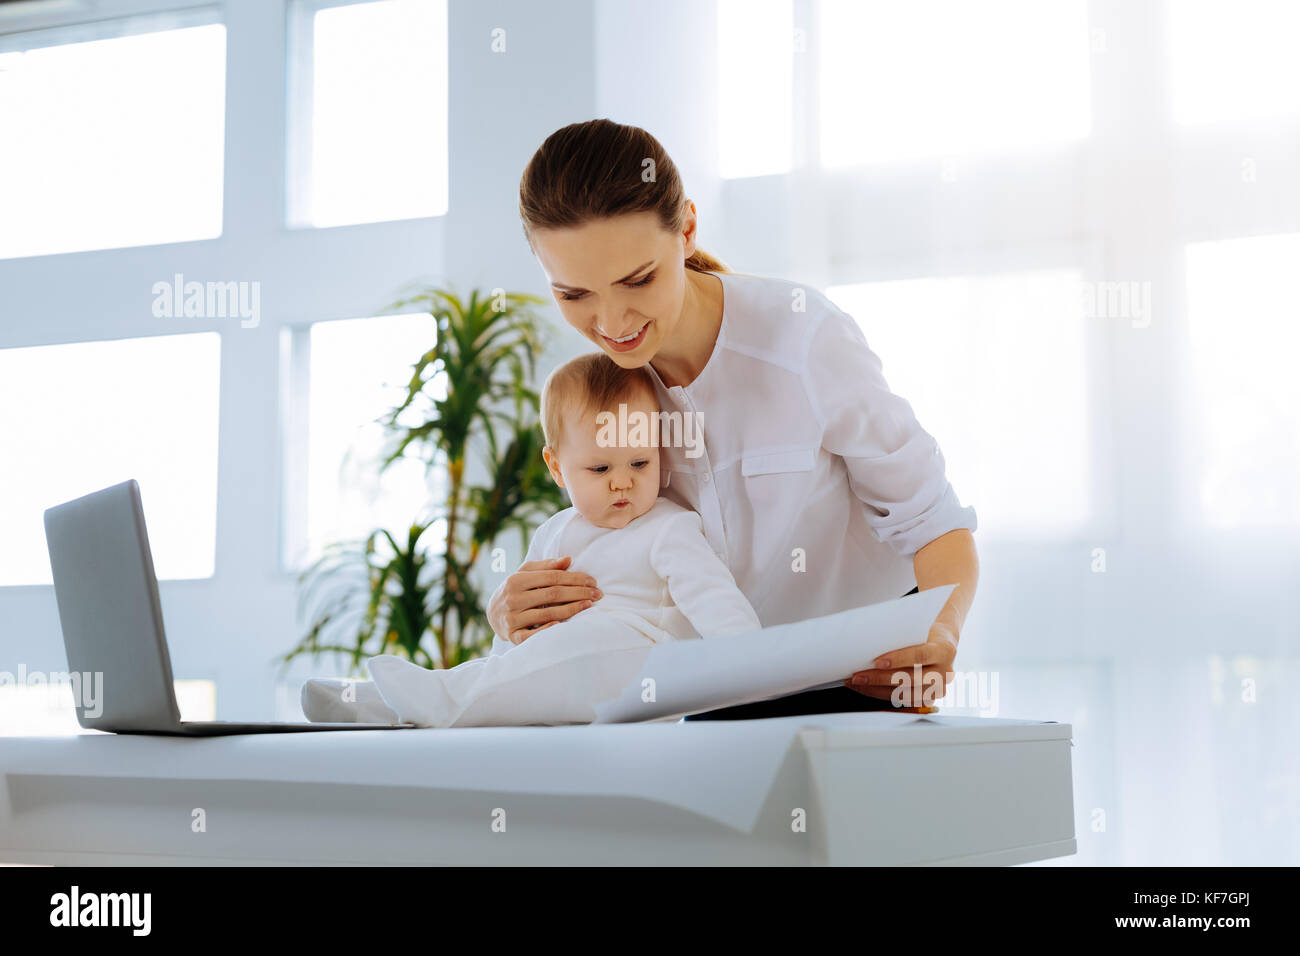 Serious baby being involved in the job of his mother Stock Photo